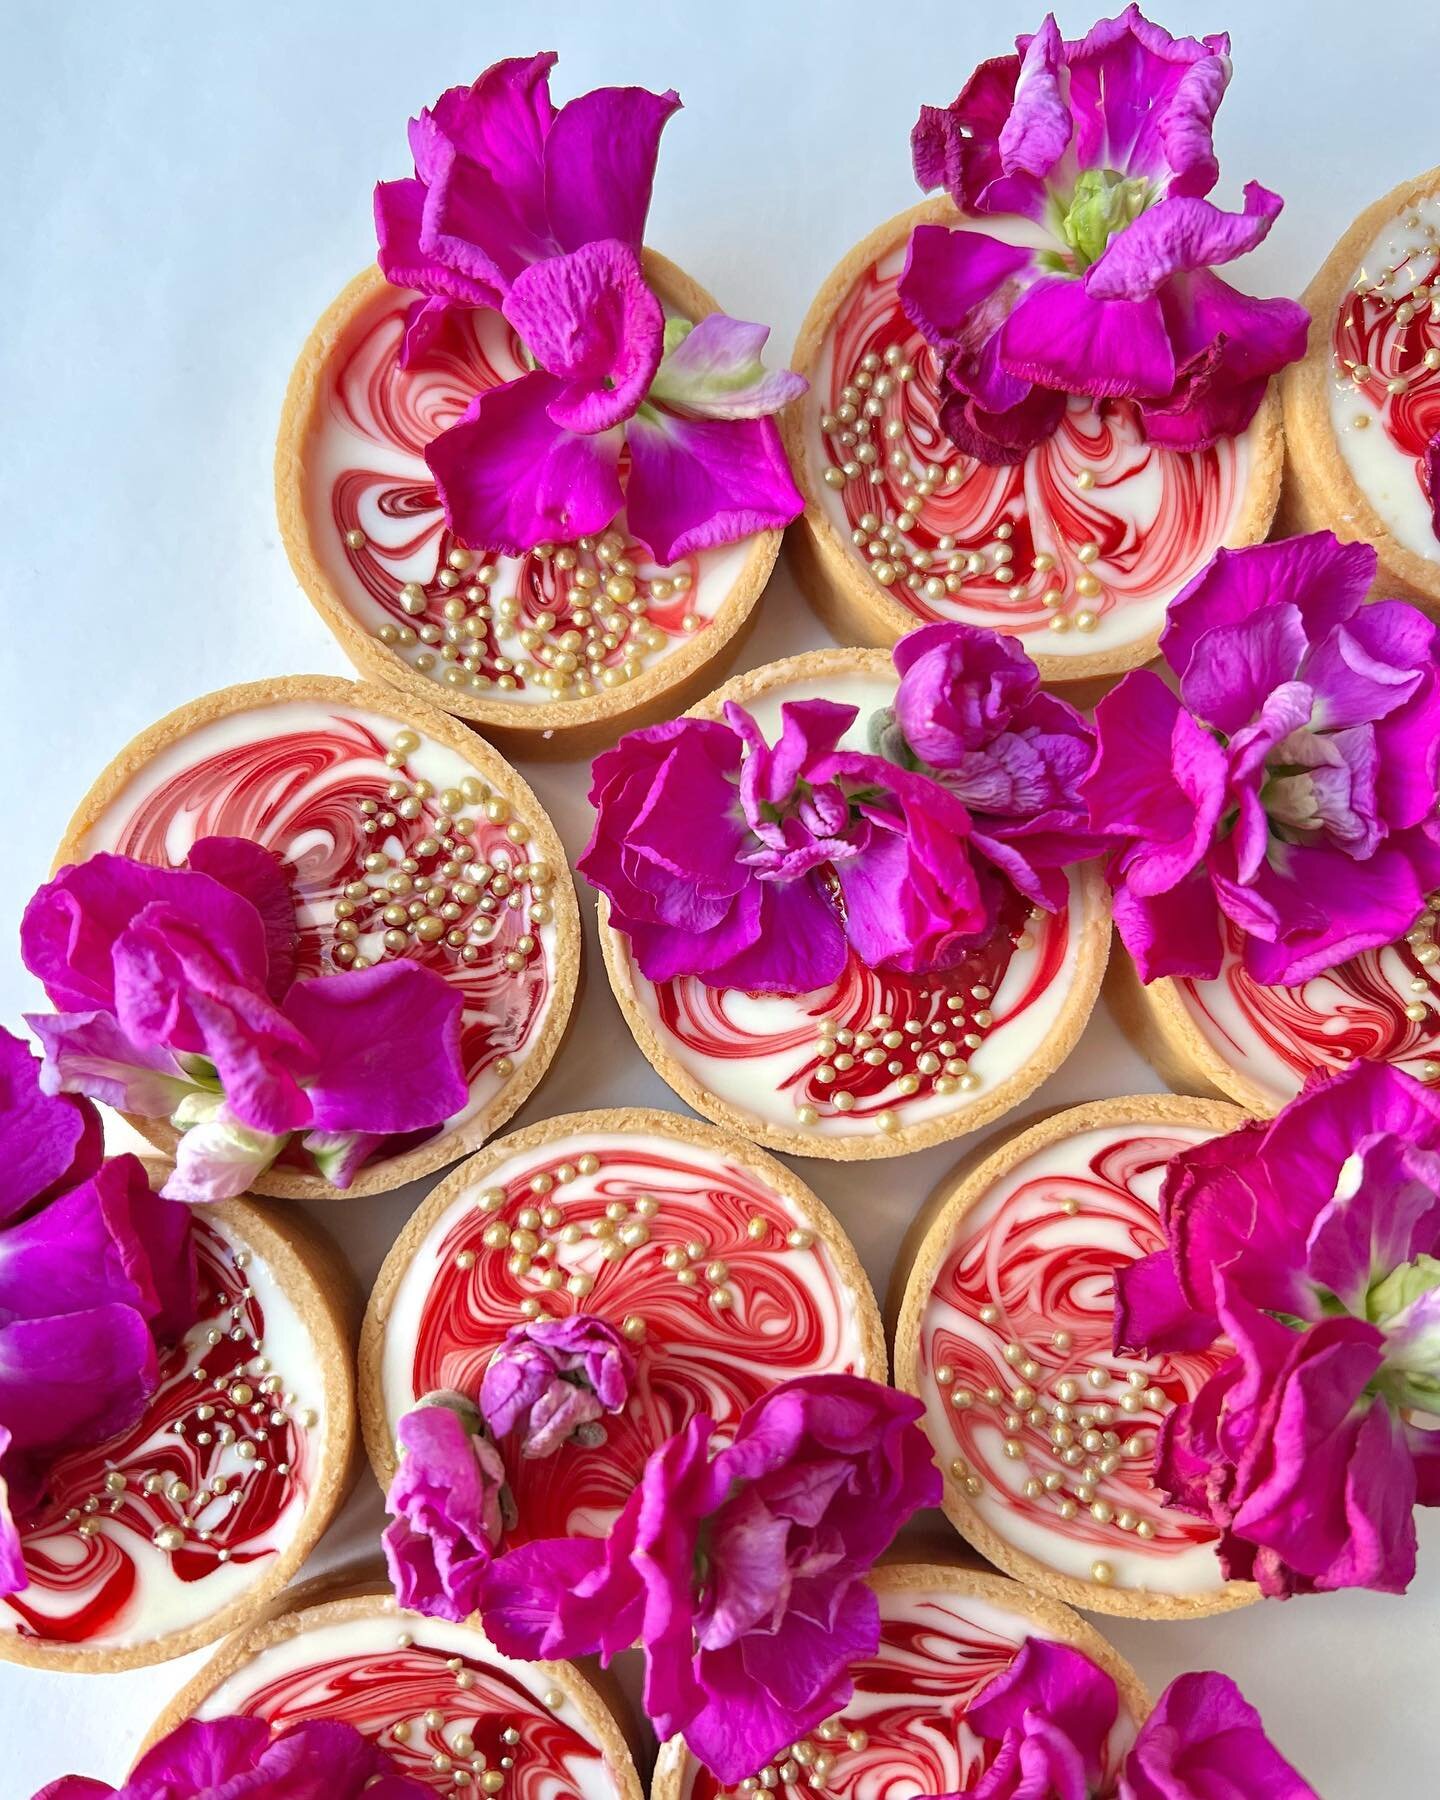 SHE&rsquo;S A TROPICAL TART 😄💖🌺🍒🥭 
Mango infused white chocolate ganache filling with a sour cherry-raspberry swirl. Topped with golden edible beads and  magenta florals, all encased in crisp golden short crust pastry. THE PERFECT BITE! 🍒🌺🥭